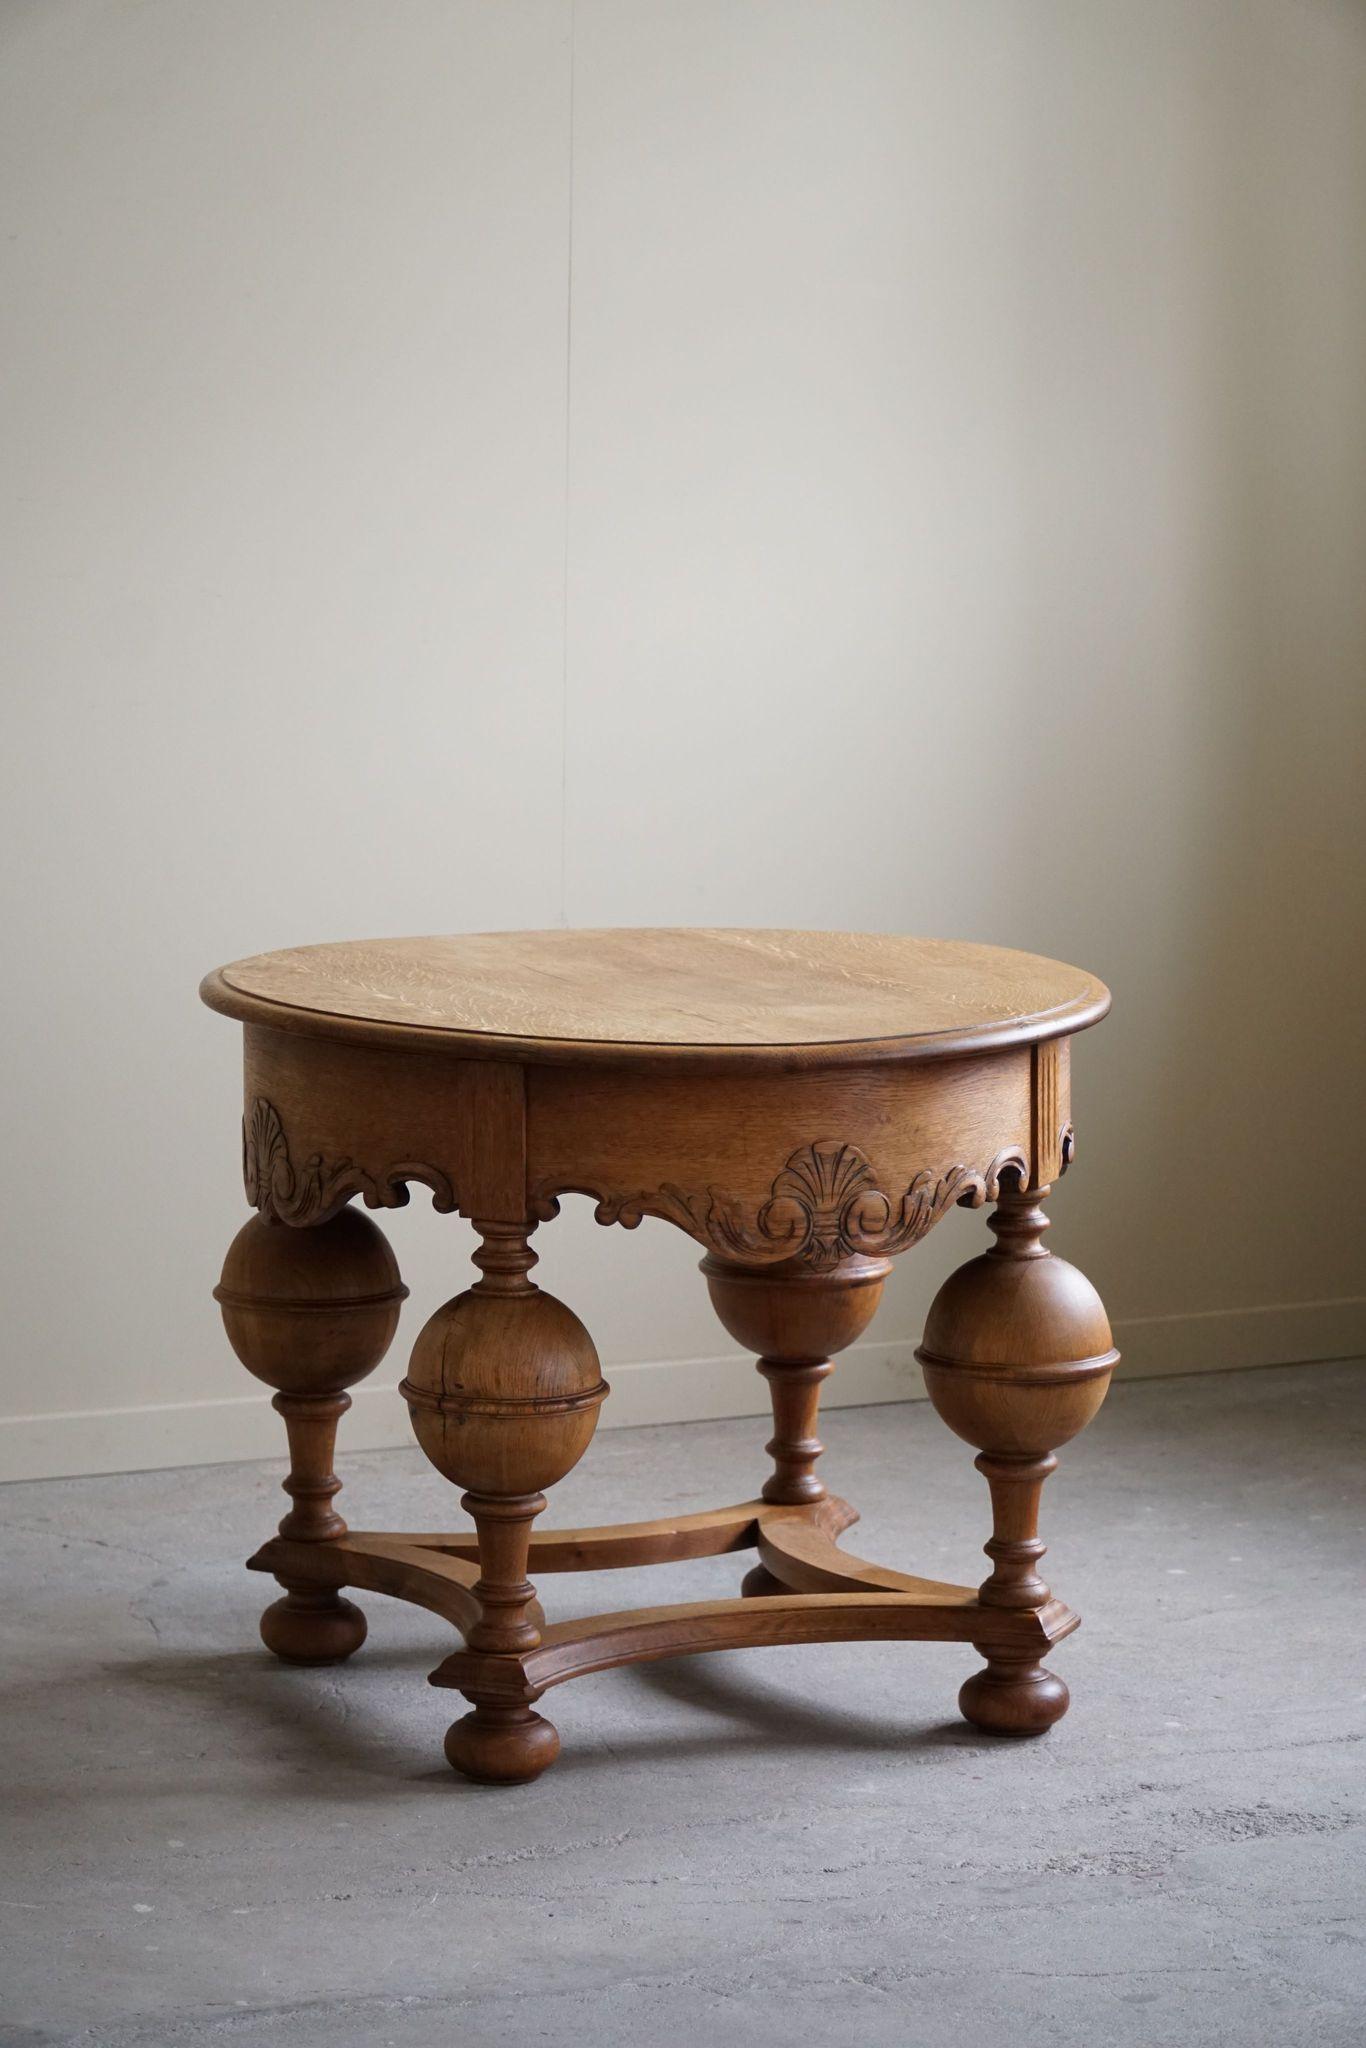 Antique Side Table in Solid Oak, Made by a Danish Cabinetmaker, 19th Century For Sale 7